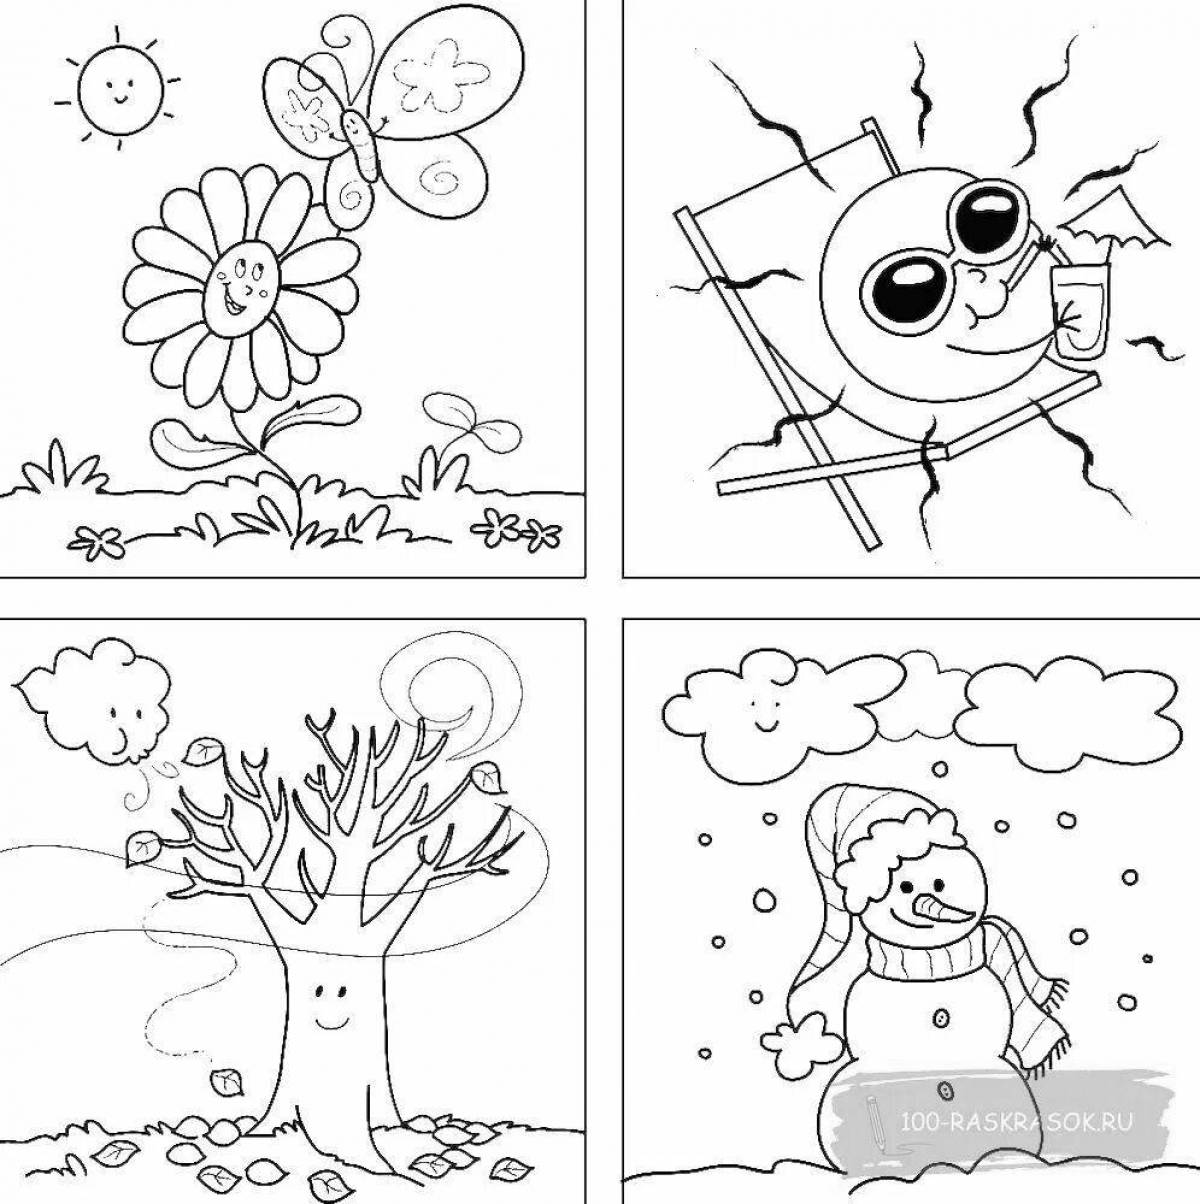 Nice coloring book for 3-4 year olds seasons